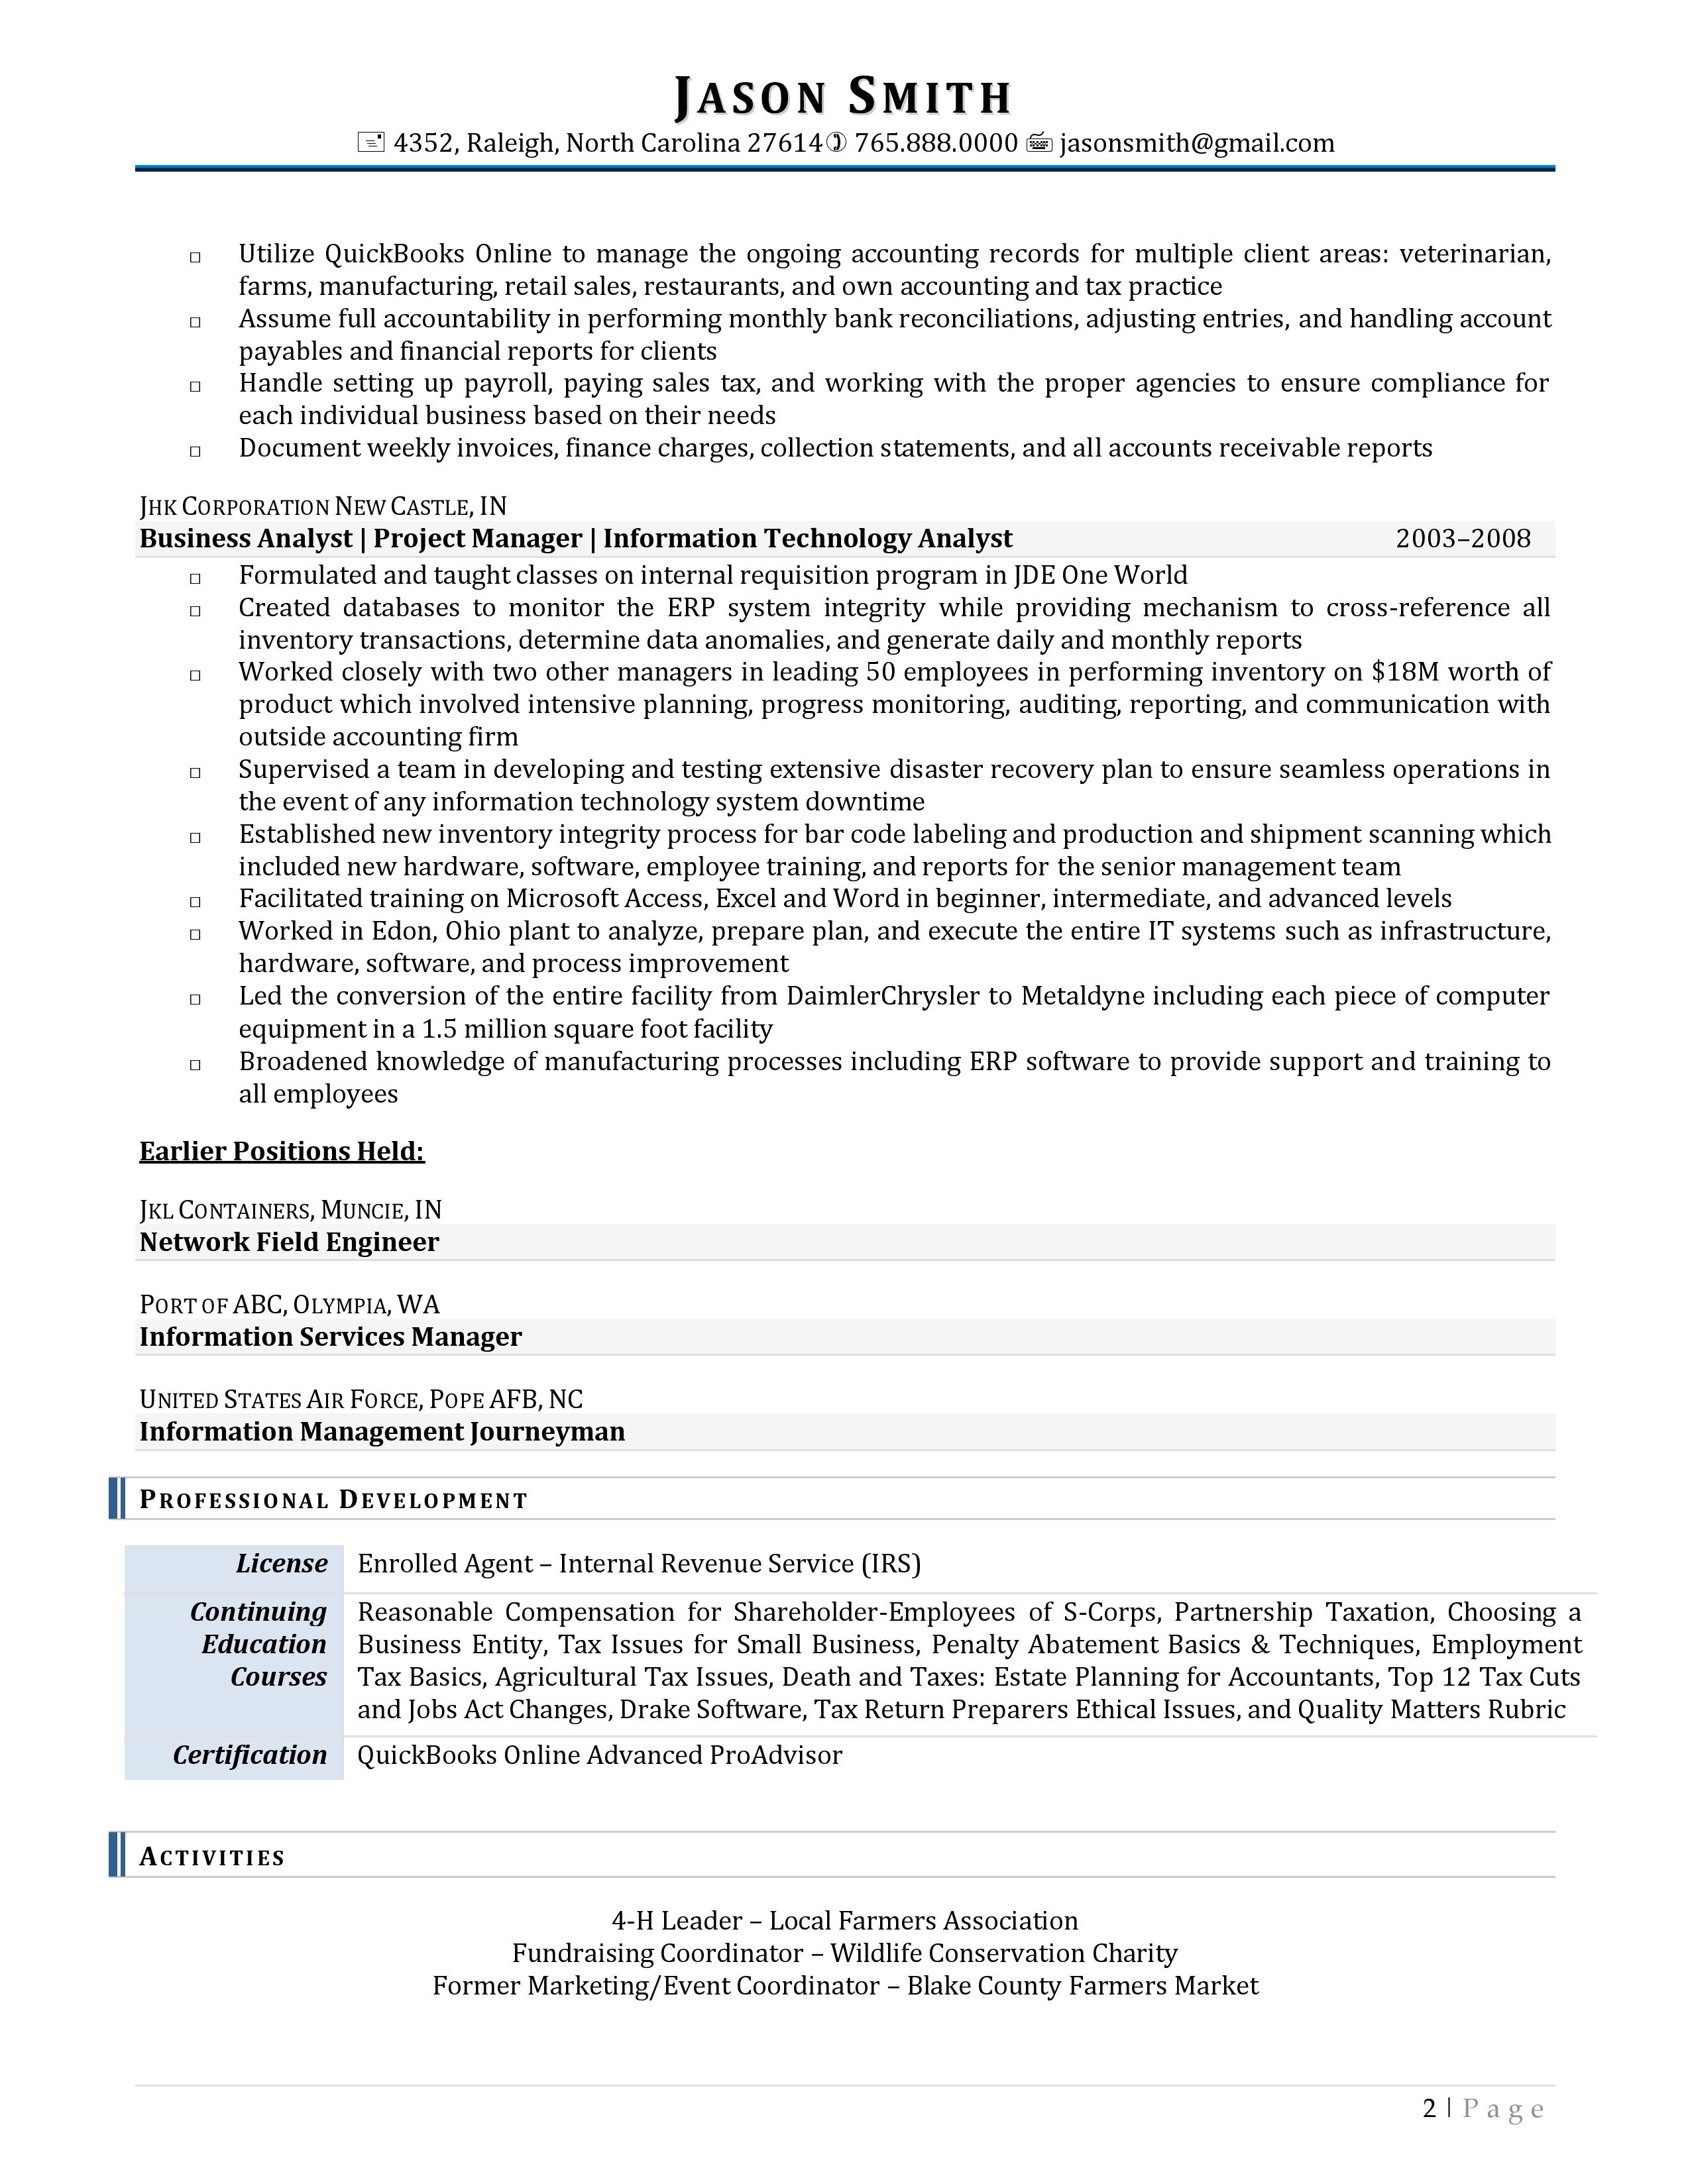 Long resume example from Resume Valley – page 2